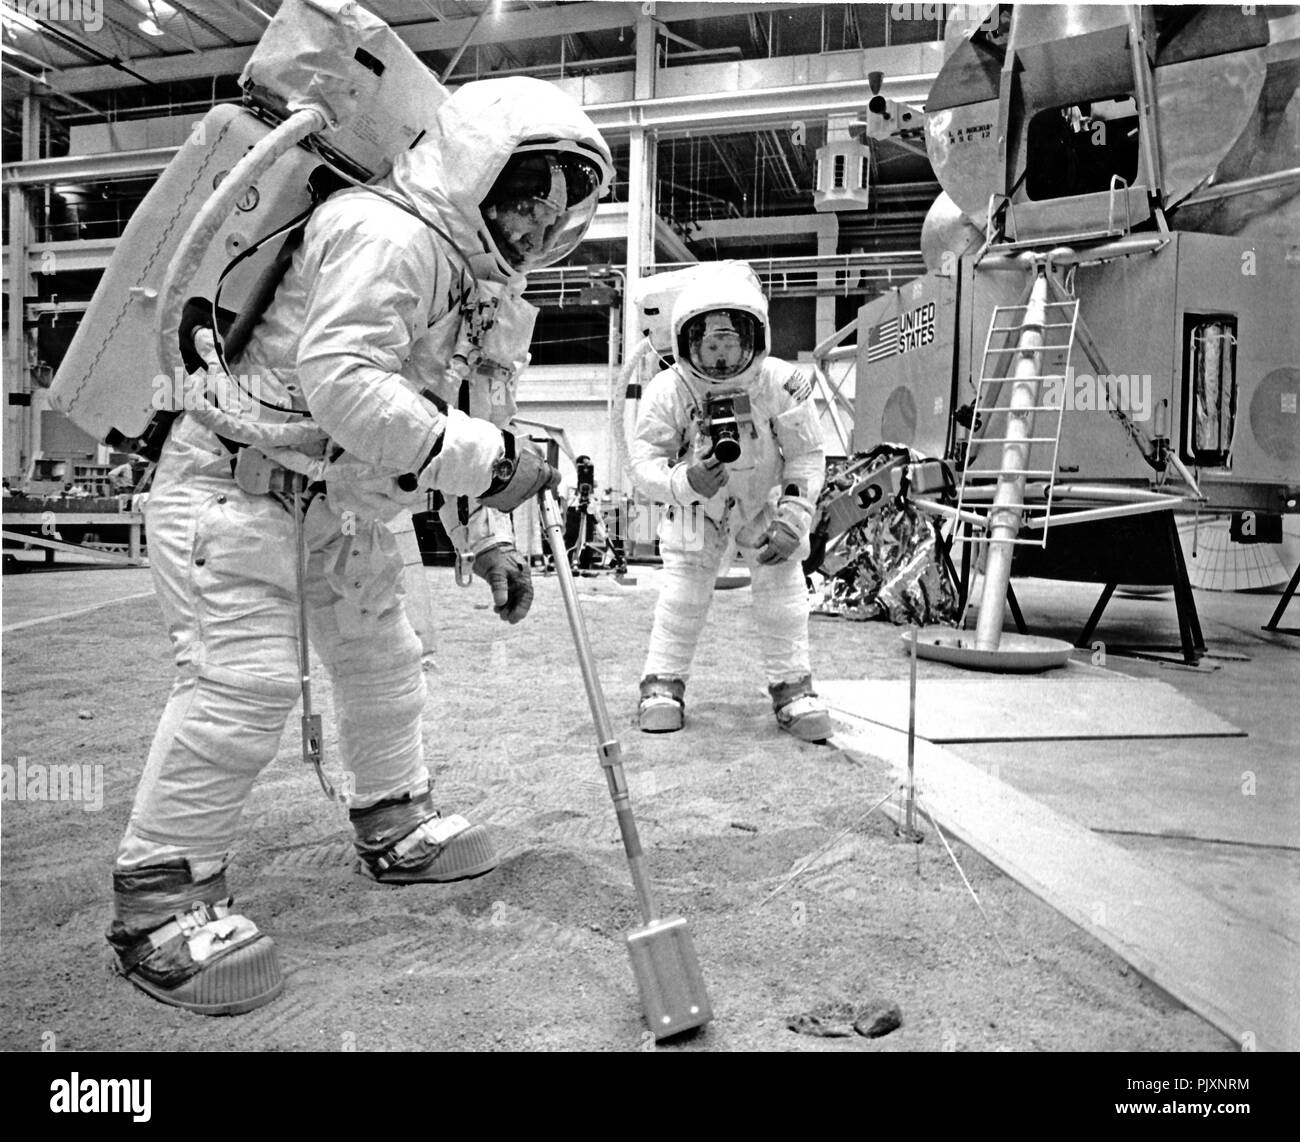 Houston, TX - (FILE) -- Apollo 11 Lunar Module (LM) Pilot Edwin E. 'Buzz' Aldrin, front, and Spacecraft Commander Neil Armstrong, rear, practice lunar surface activities at the Manned Spacecraft Center, Houston, Texas on Friday, April 18, 1969.  Aldrin is using a scoop to collect samples of the surface while Armstrong takes pictures.  The Lunar Module (LM) is in the background.  The astronauts are in space suits.  Breathing oxygen, pressurization and temperature control are provided by backpacks.  Apollo 11 launched on July 16, 1969 and safely returned to Earth on July 24, 1969. Credit: NASA v Stock Photo